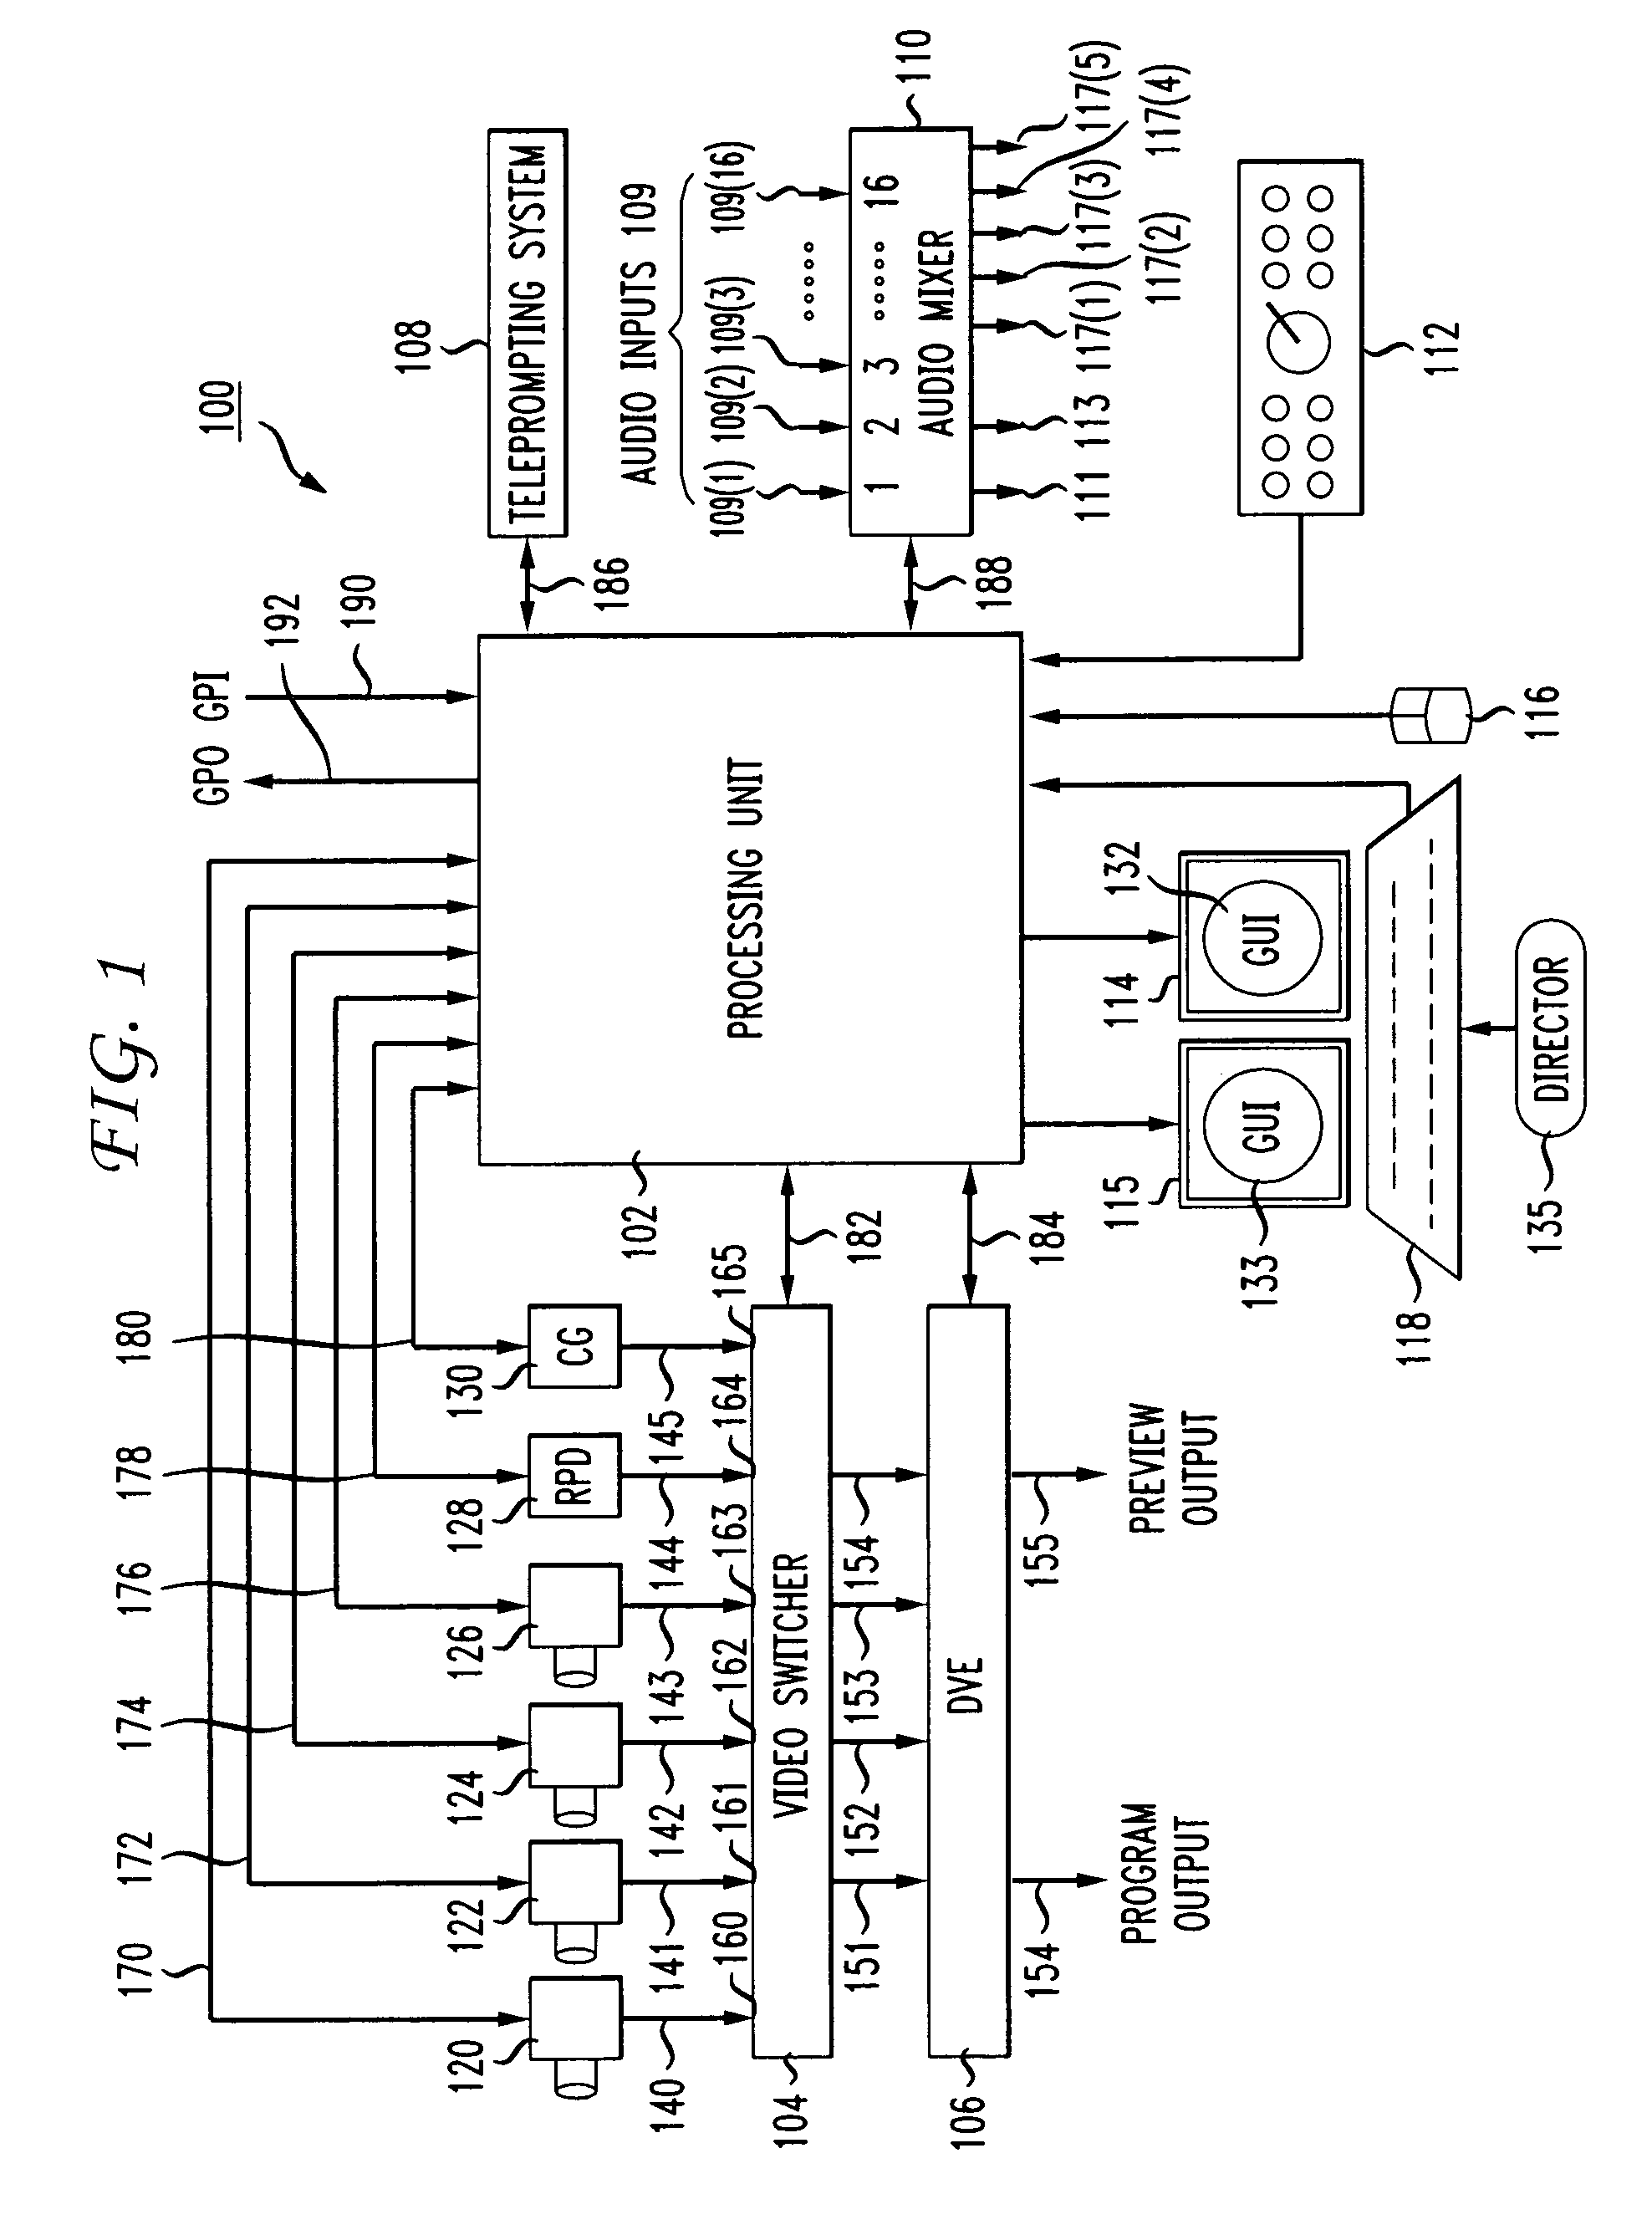 System and method for real time video production and multicasting